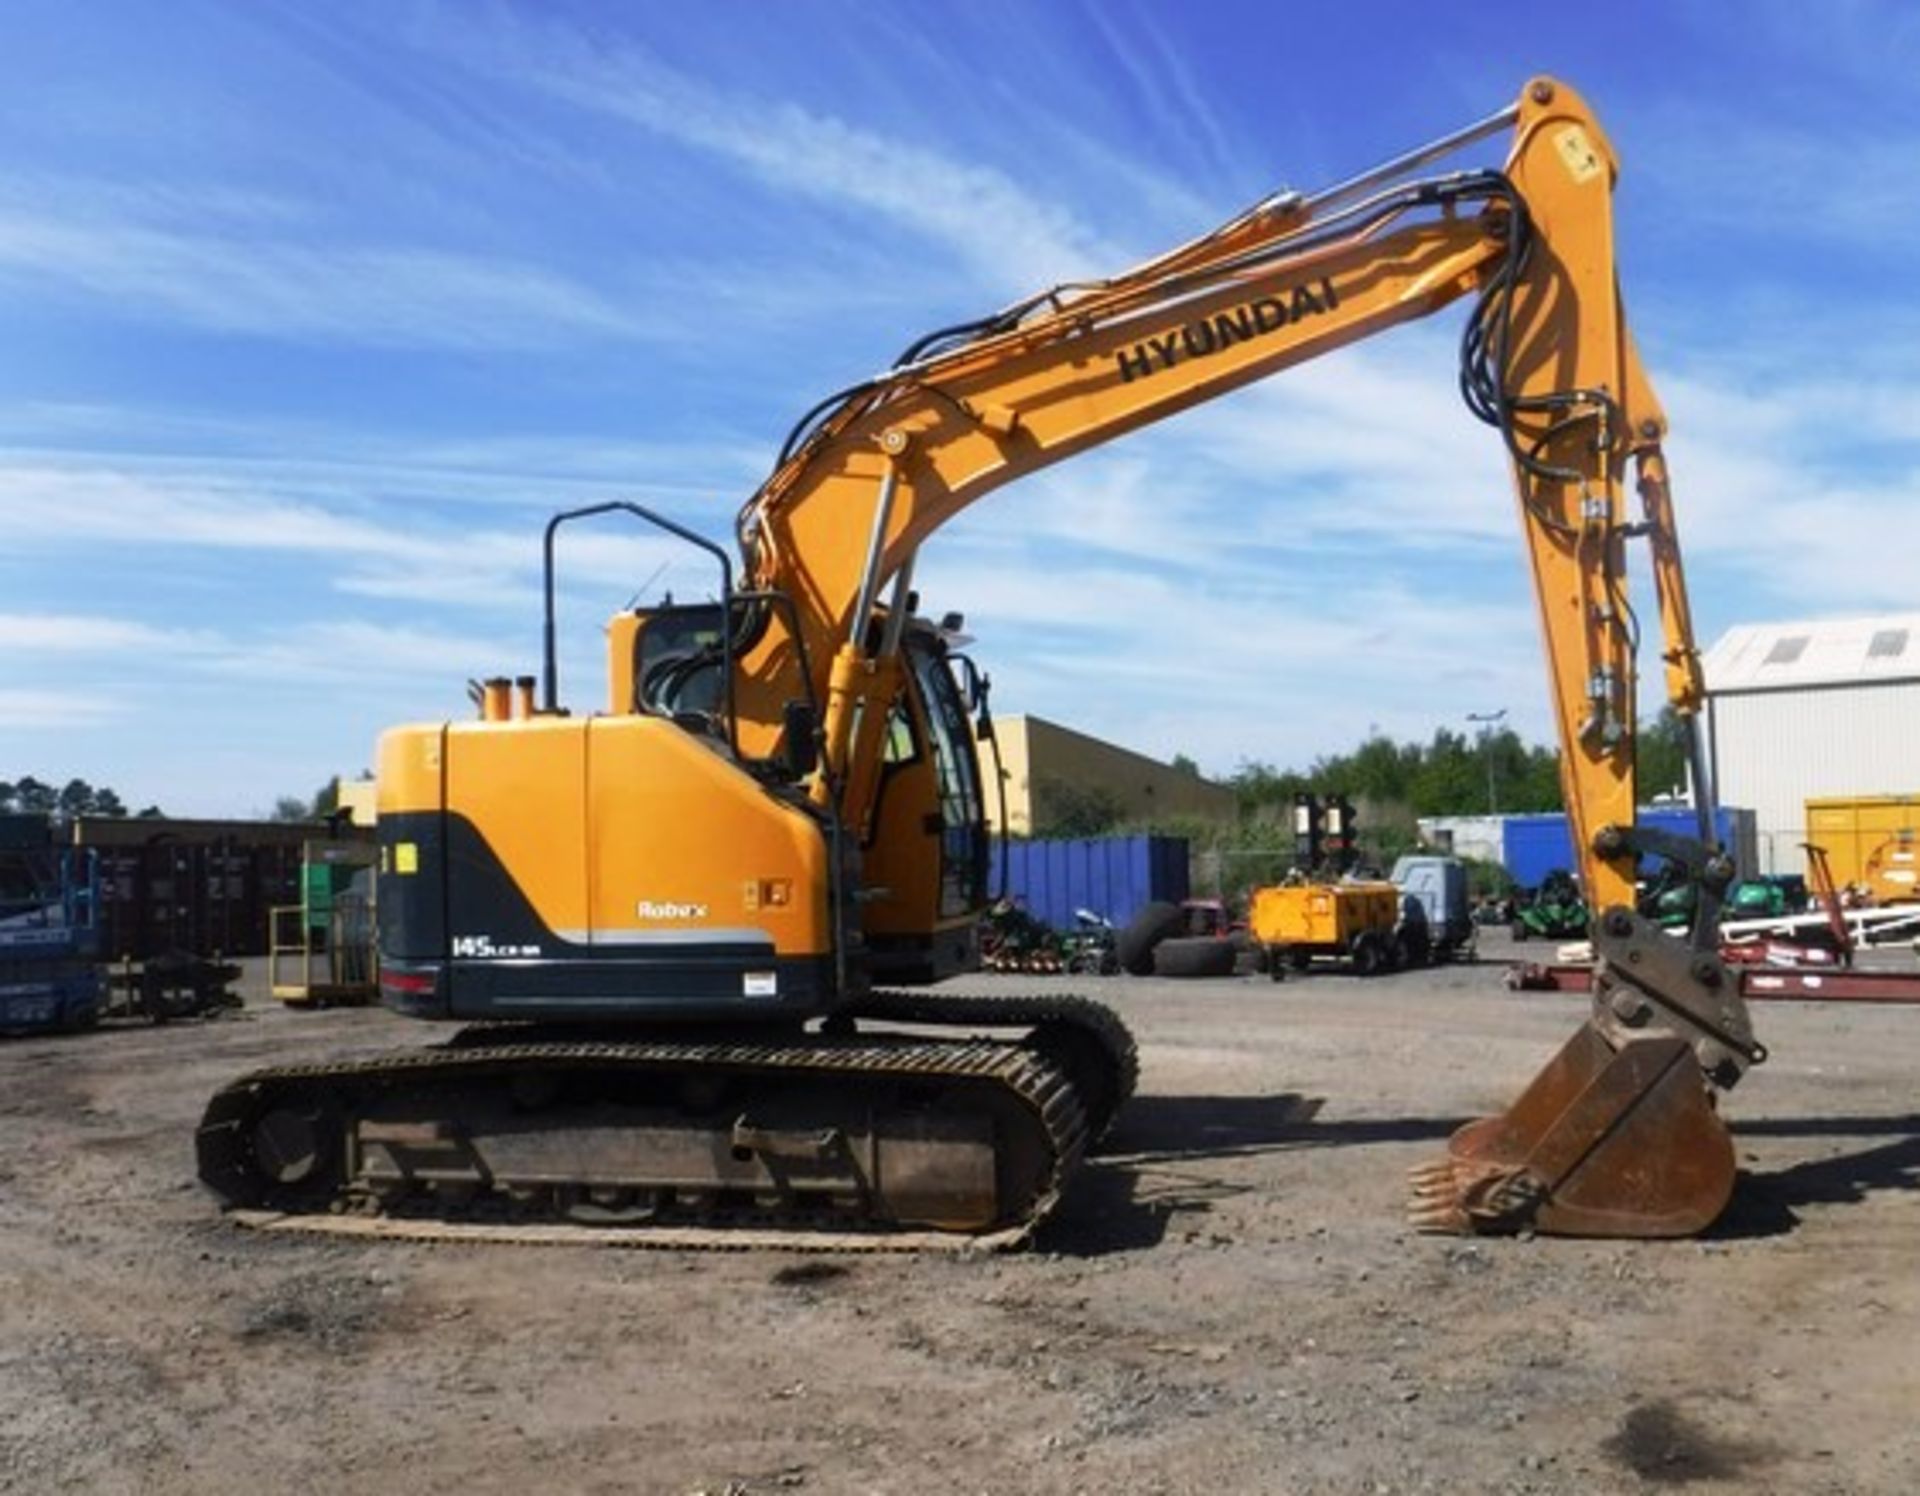 2014 HYUNDAI 145-9A excavator c/w 1 bucket. Short body version ideal for site work. s/n 068. 4263hr - Image 12 of 32